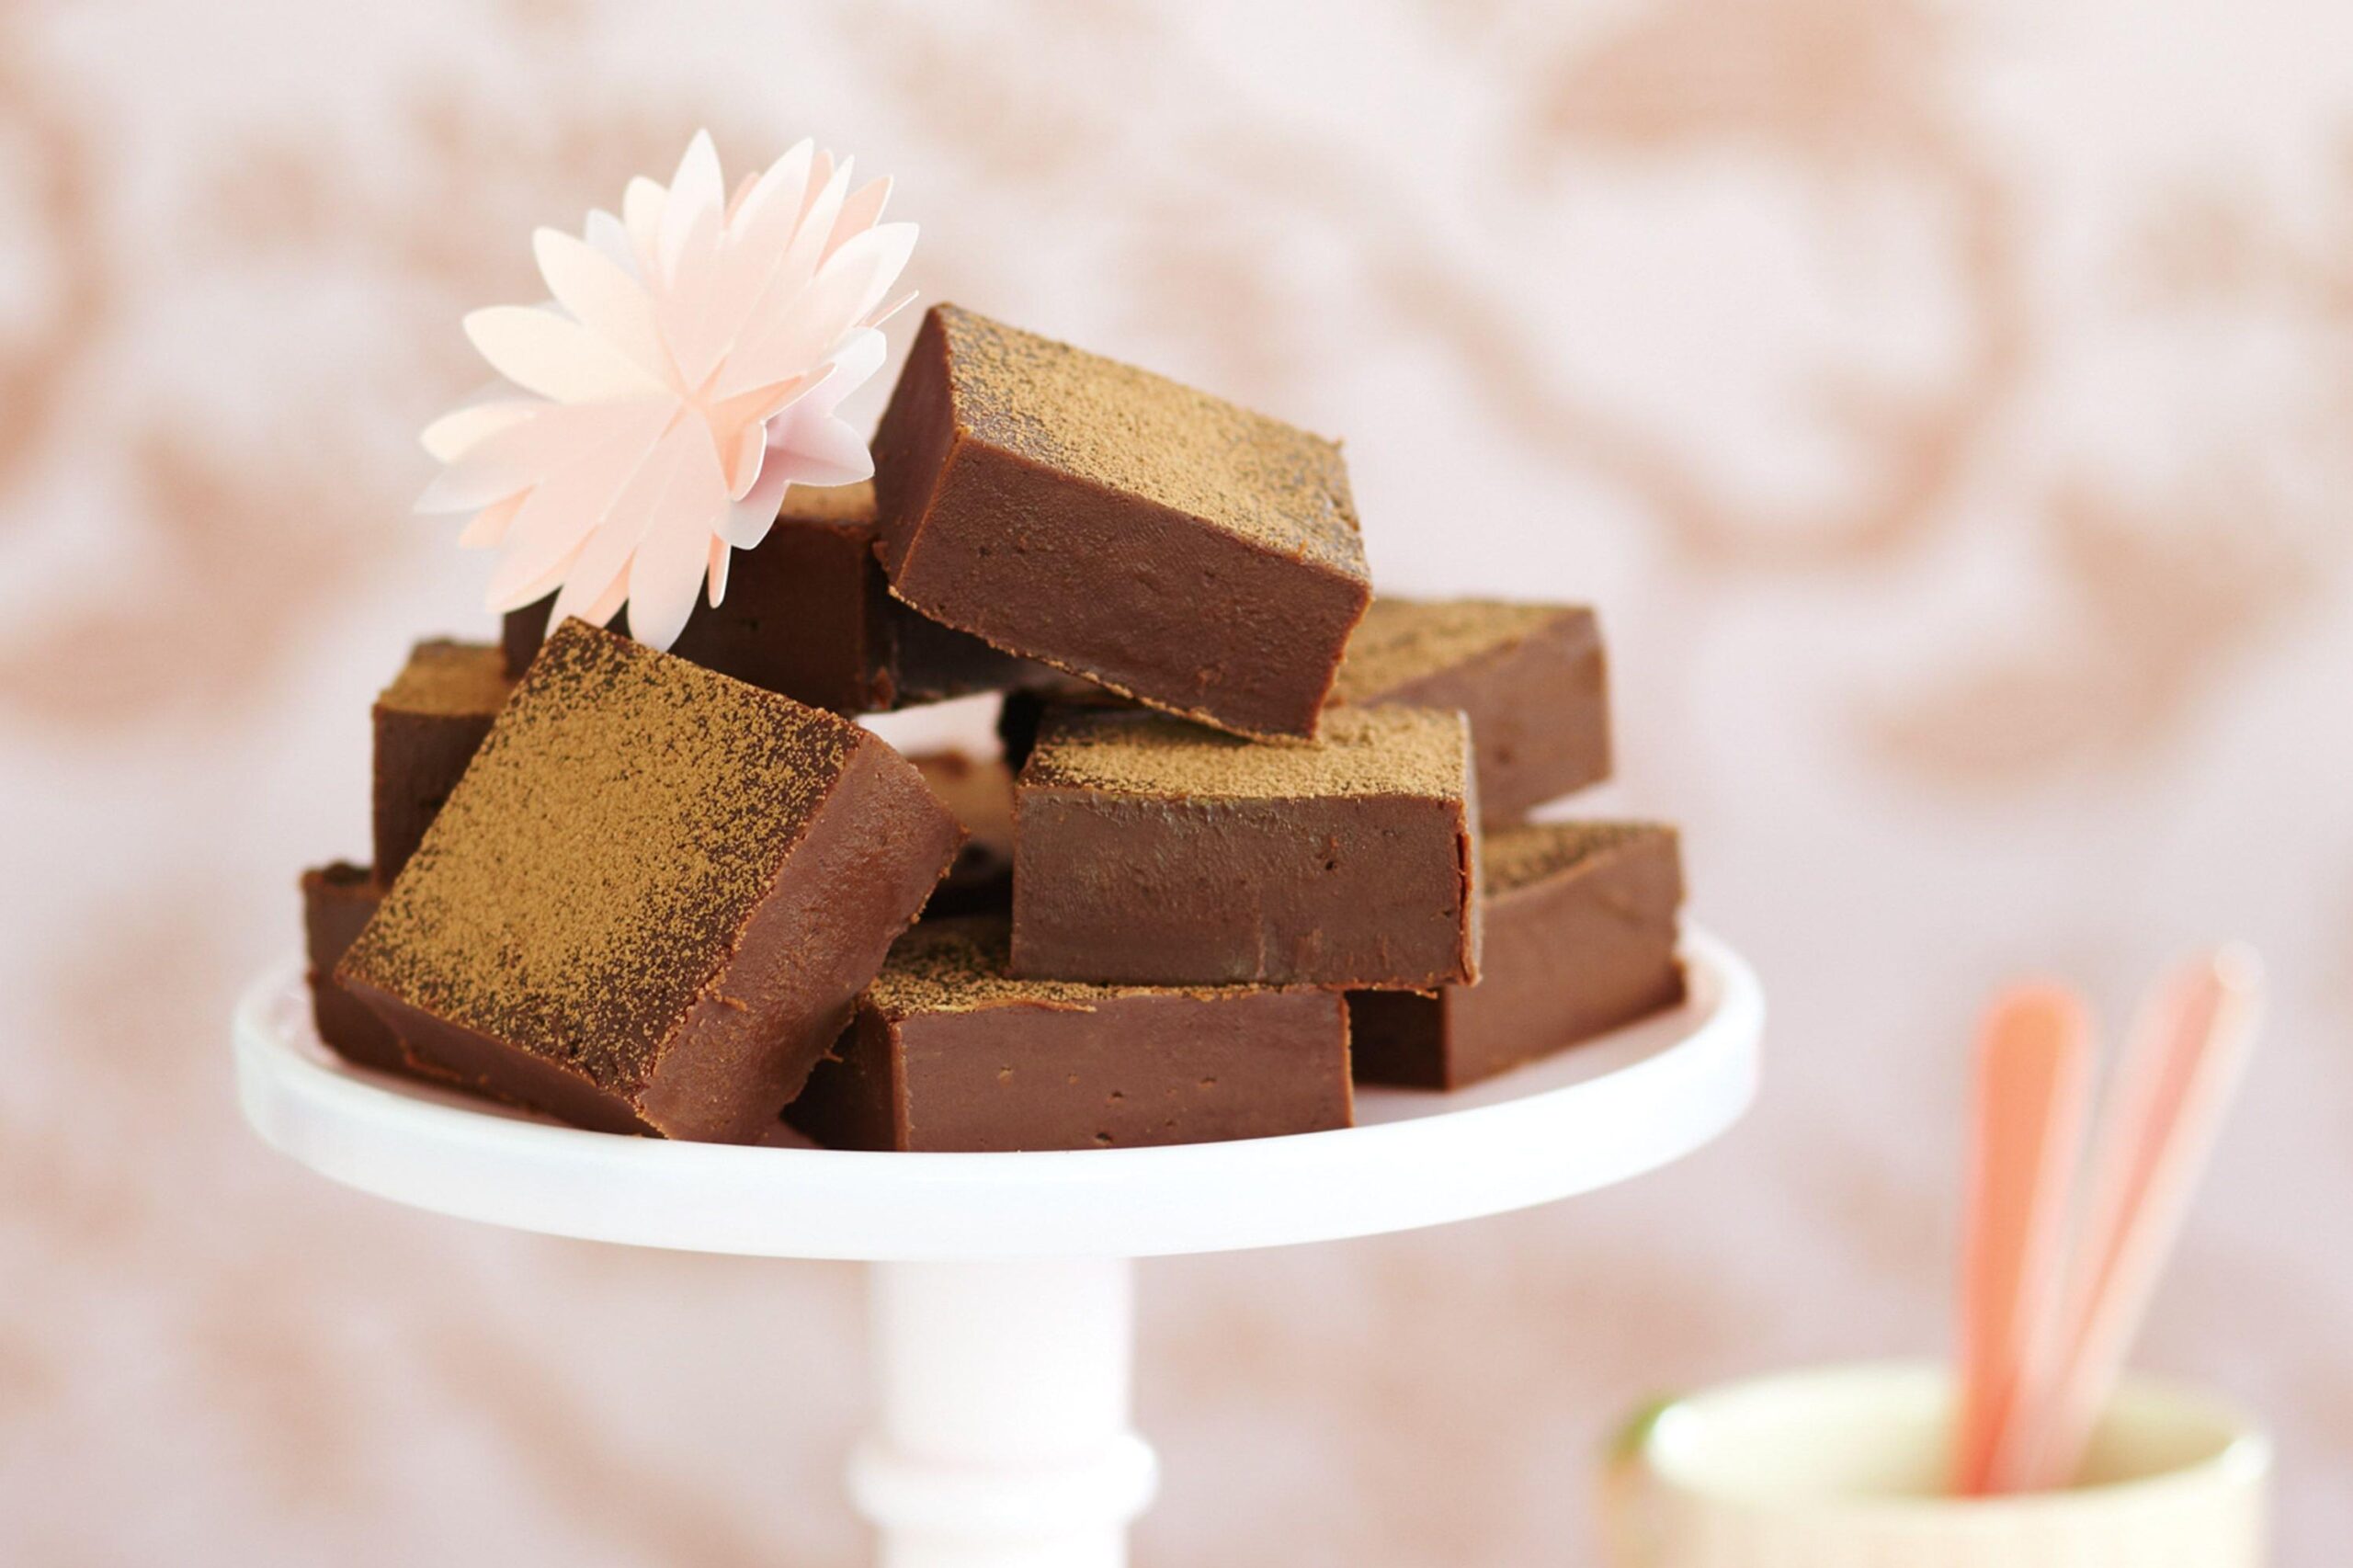  A mouth-watering piece of chocolate fudge that will have you reaching for seconds.